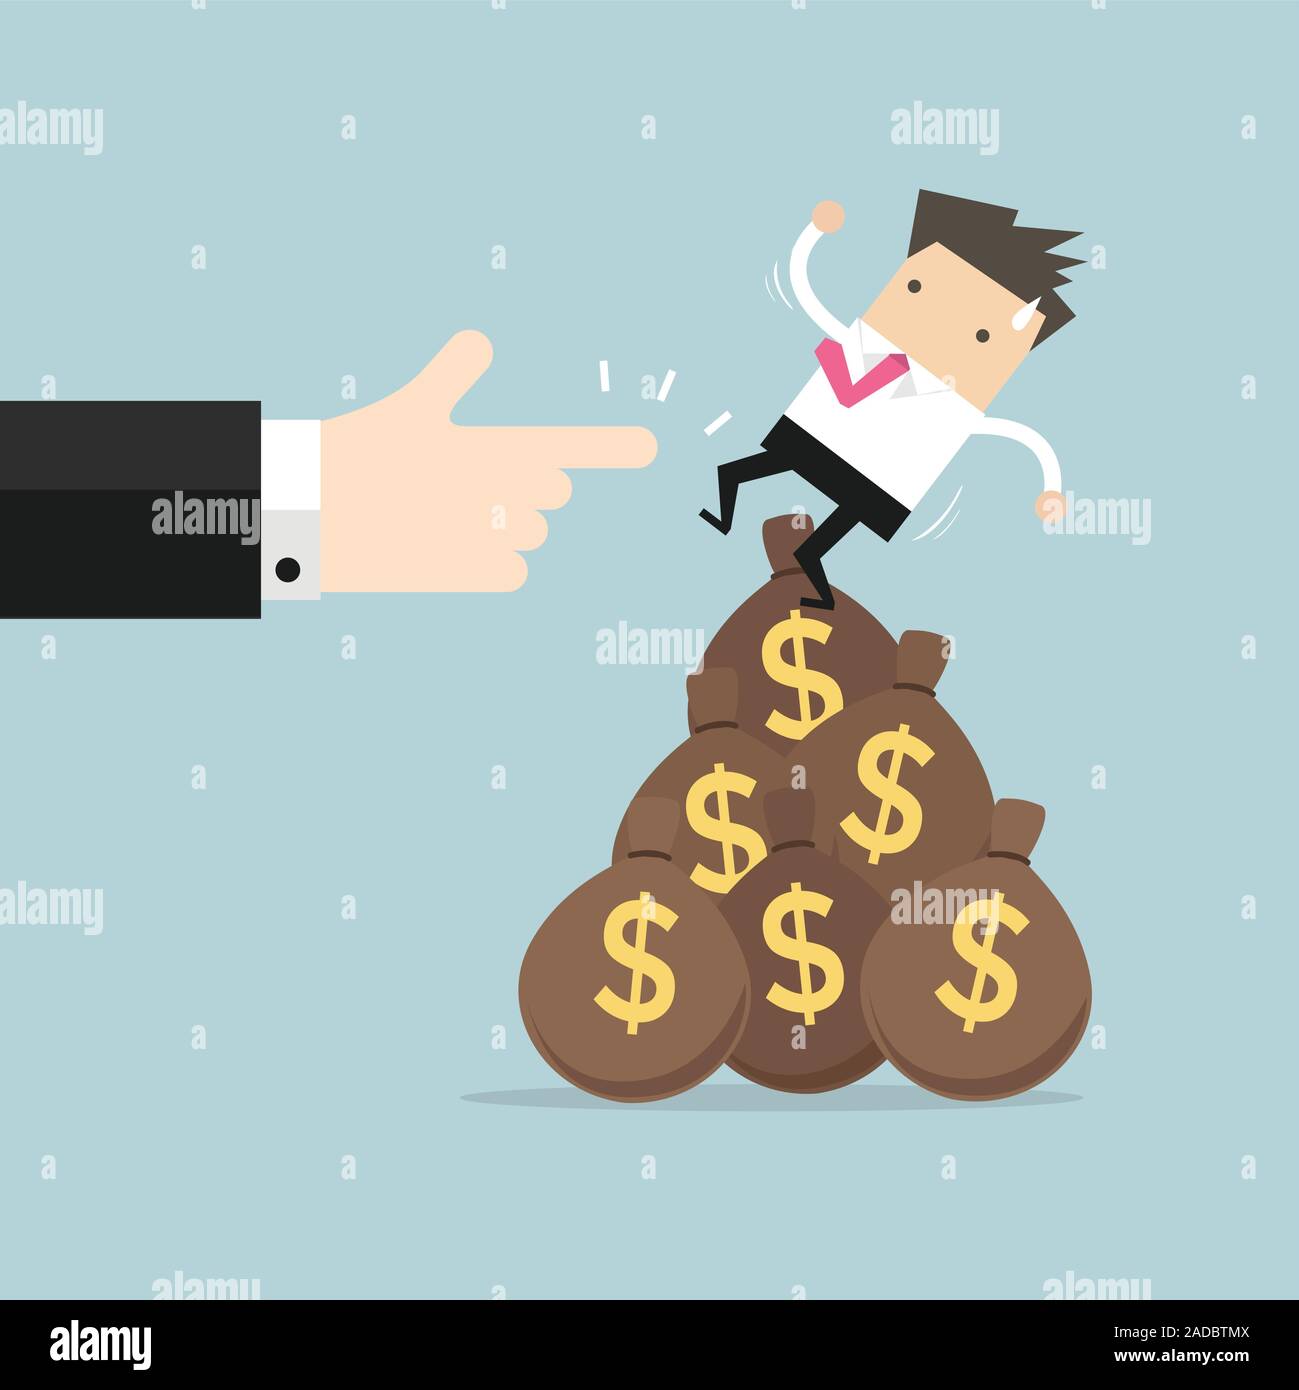 Businessman falling from money bag. Stock Vector